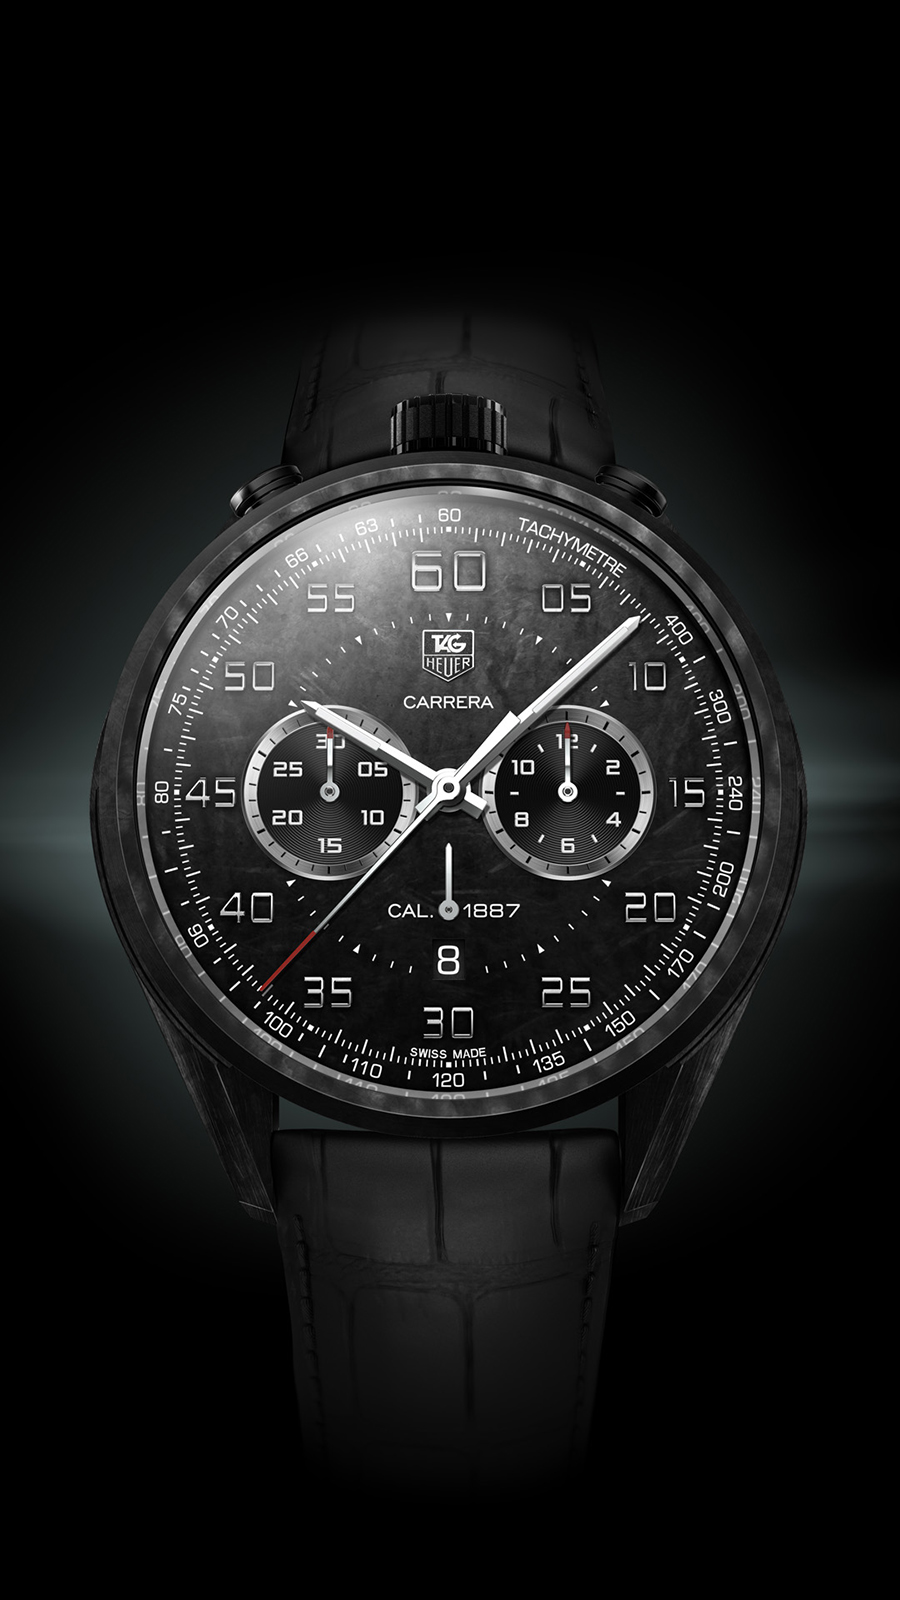 TAG Heuer Carrera Watch Android Wallpaper